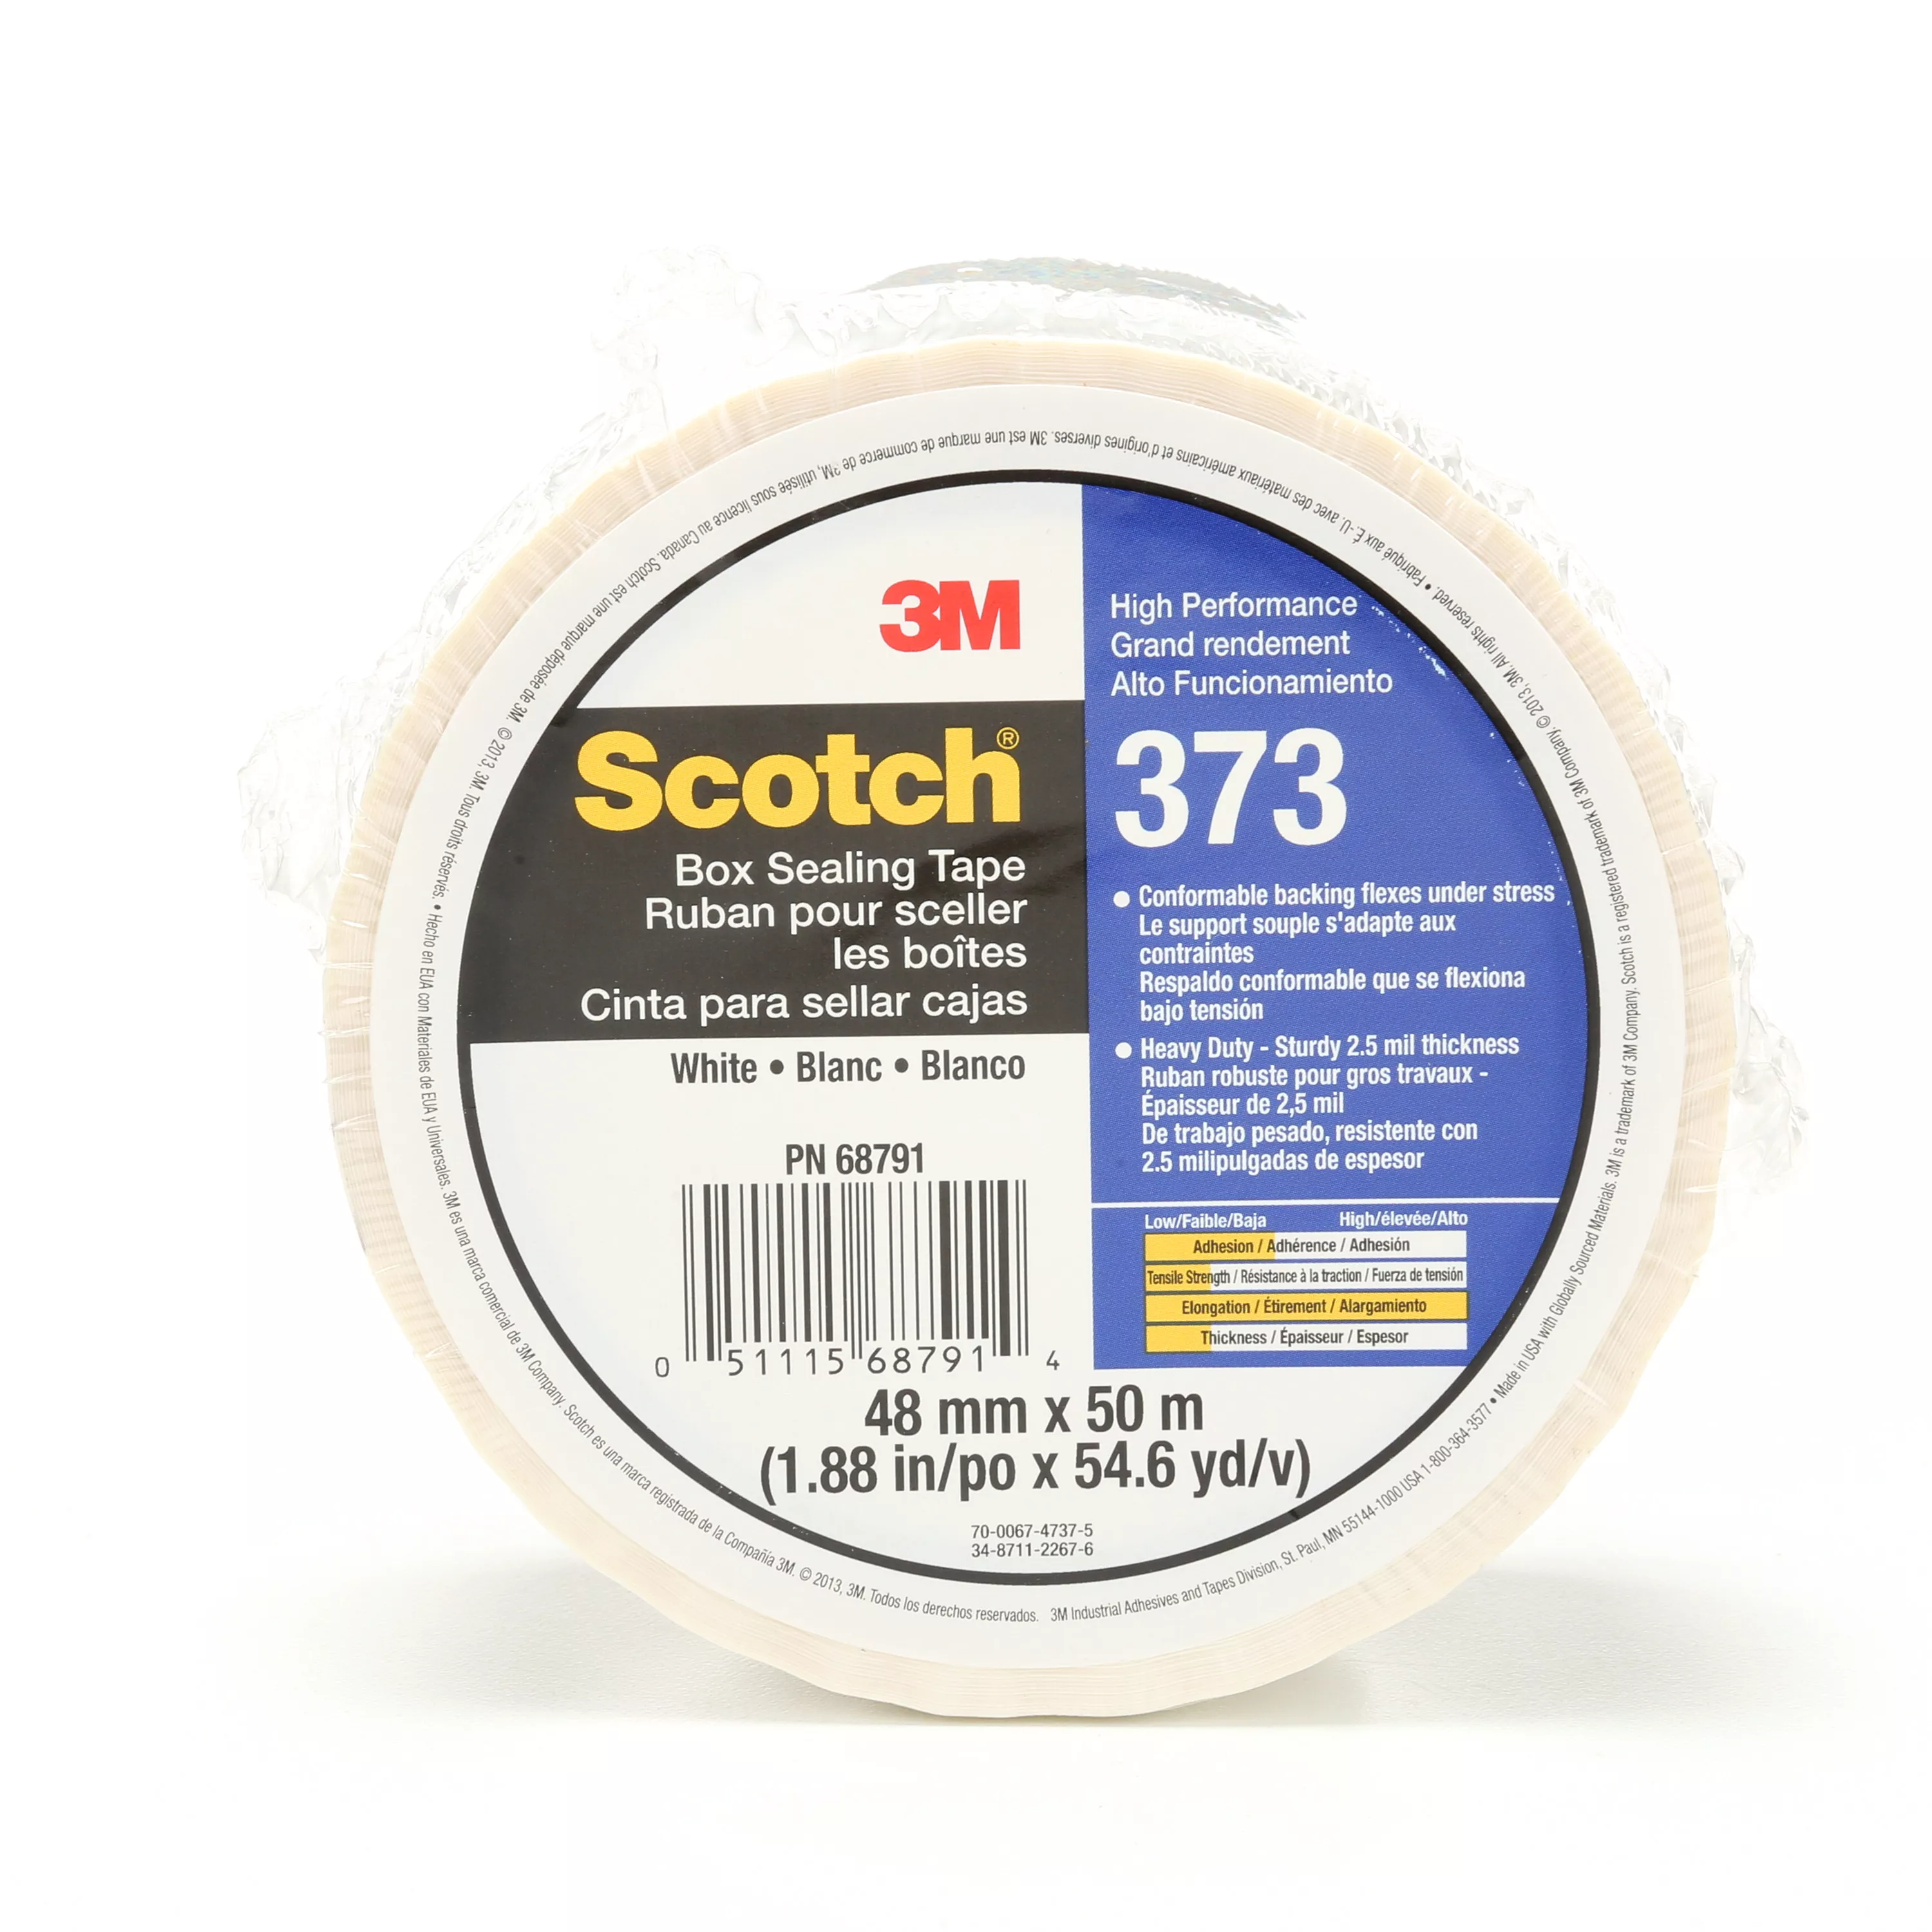 Scotch® Box Sealing Tape 373, White, 48 mm x 50 m, 36/Case, Individually
Wrapped Conveniently Packaged